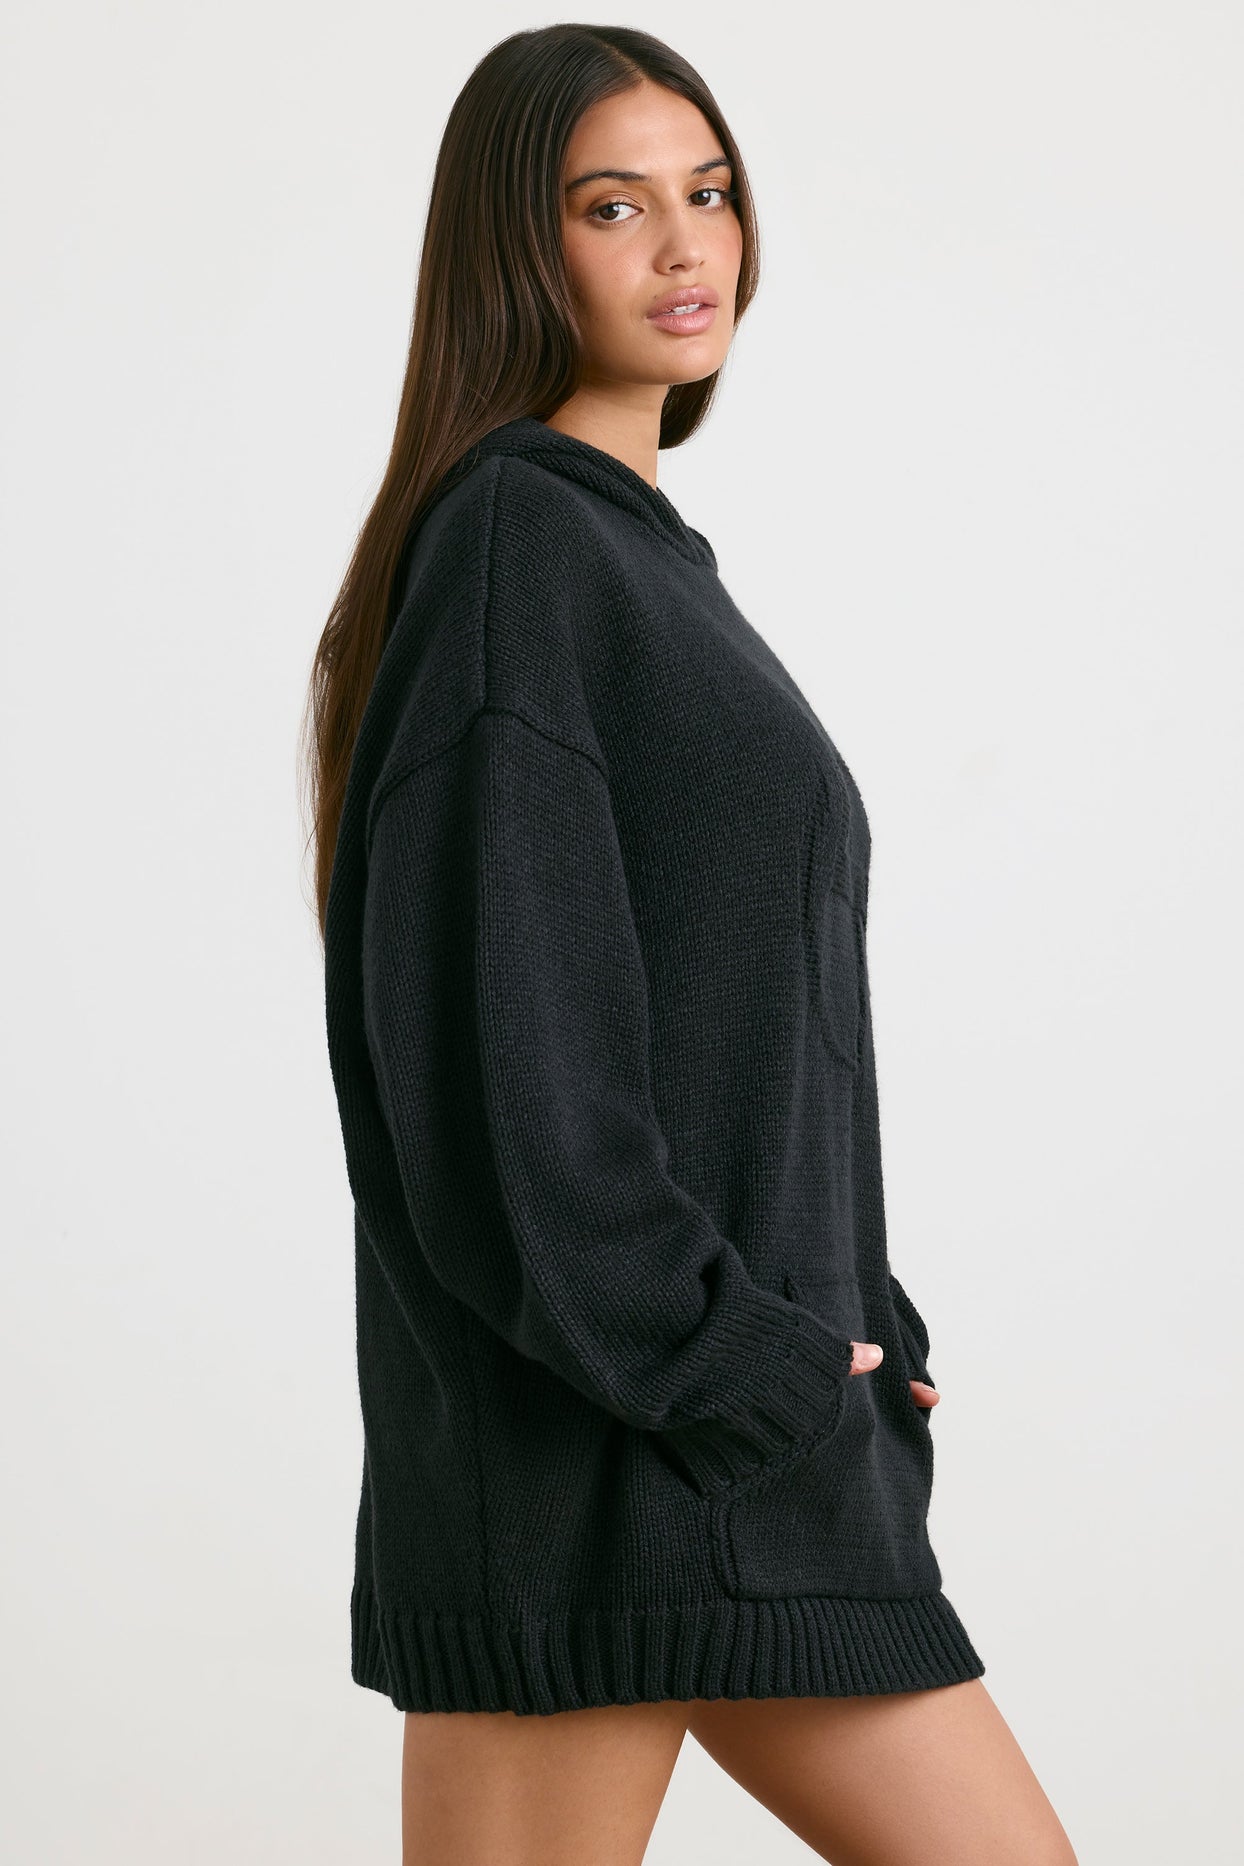 Oversized Chunky Knit Hoodie in Black